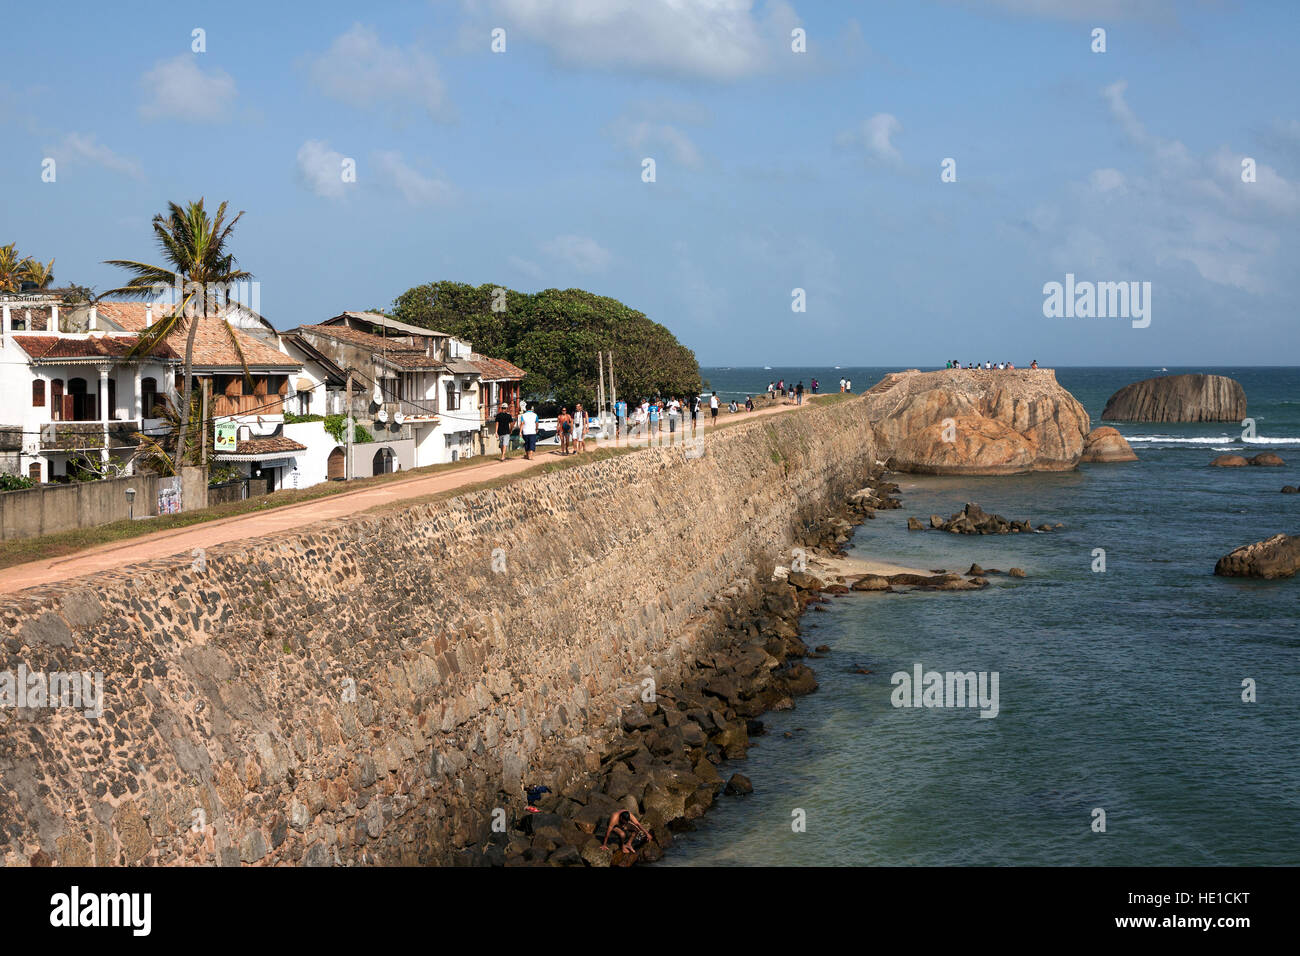 Ramparts, Galle Fort, Galle, UNESCO World Heritage Site, Southern Province, Sri Lanka Stock Photo